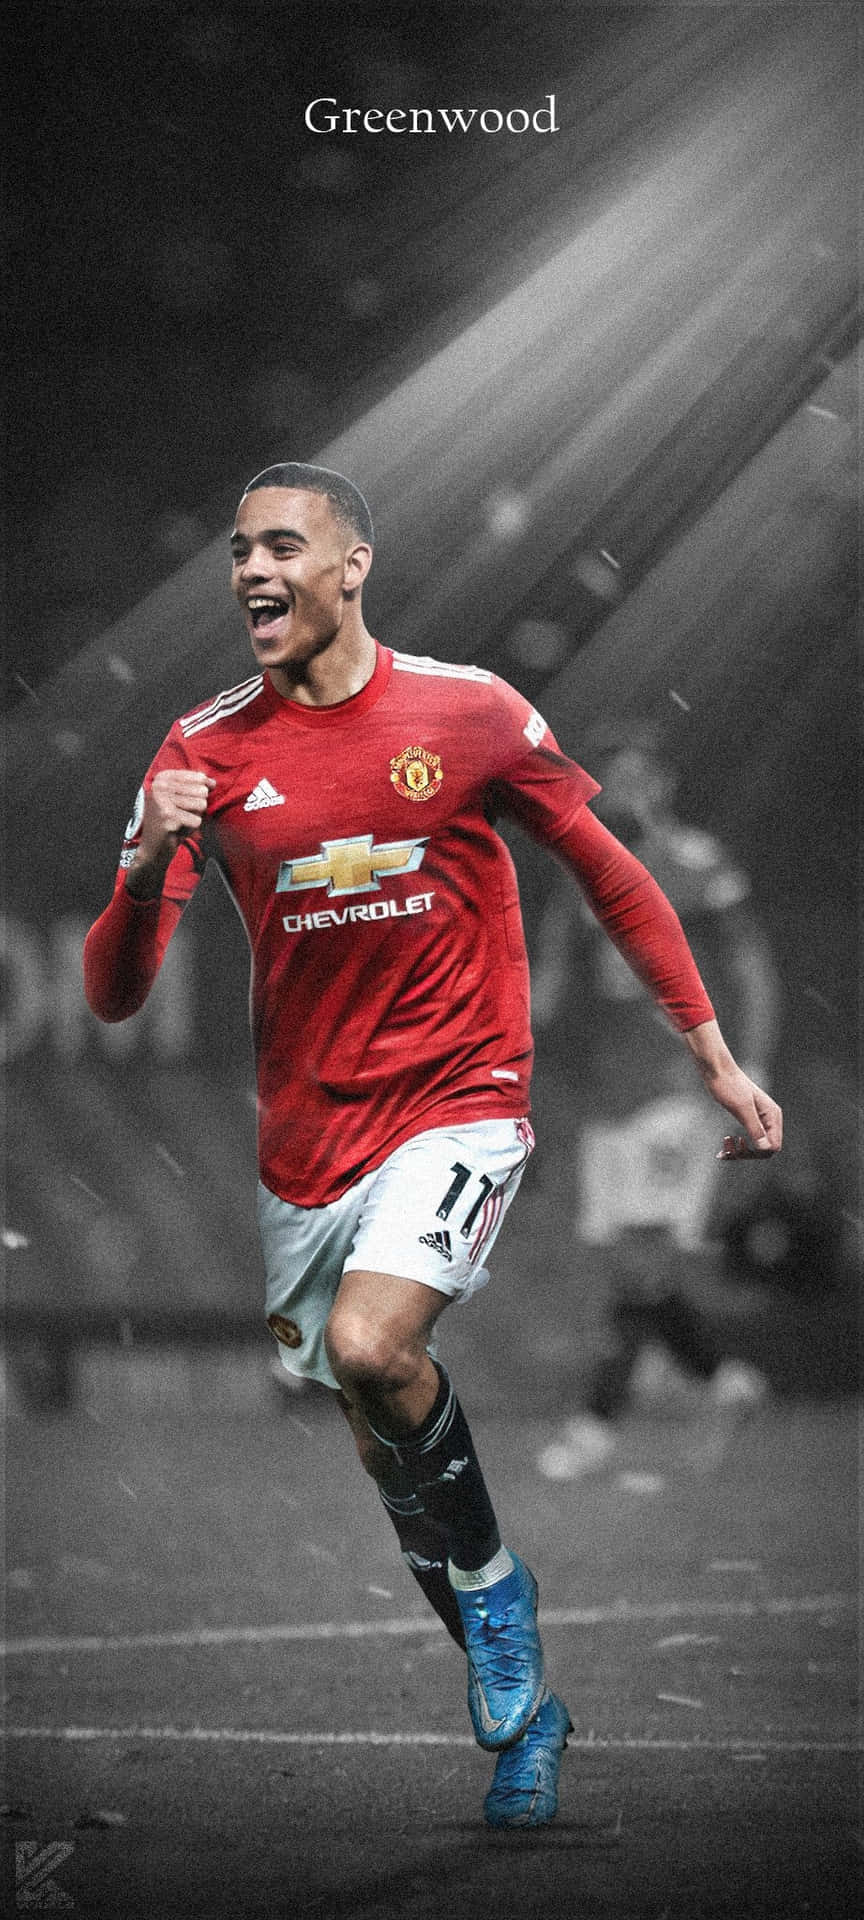 In-Action Shot of Manchester United's Rising Star Mason Greenwood